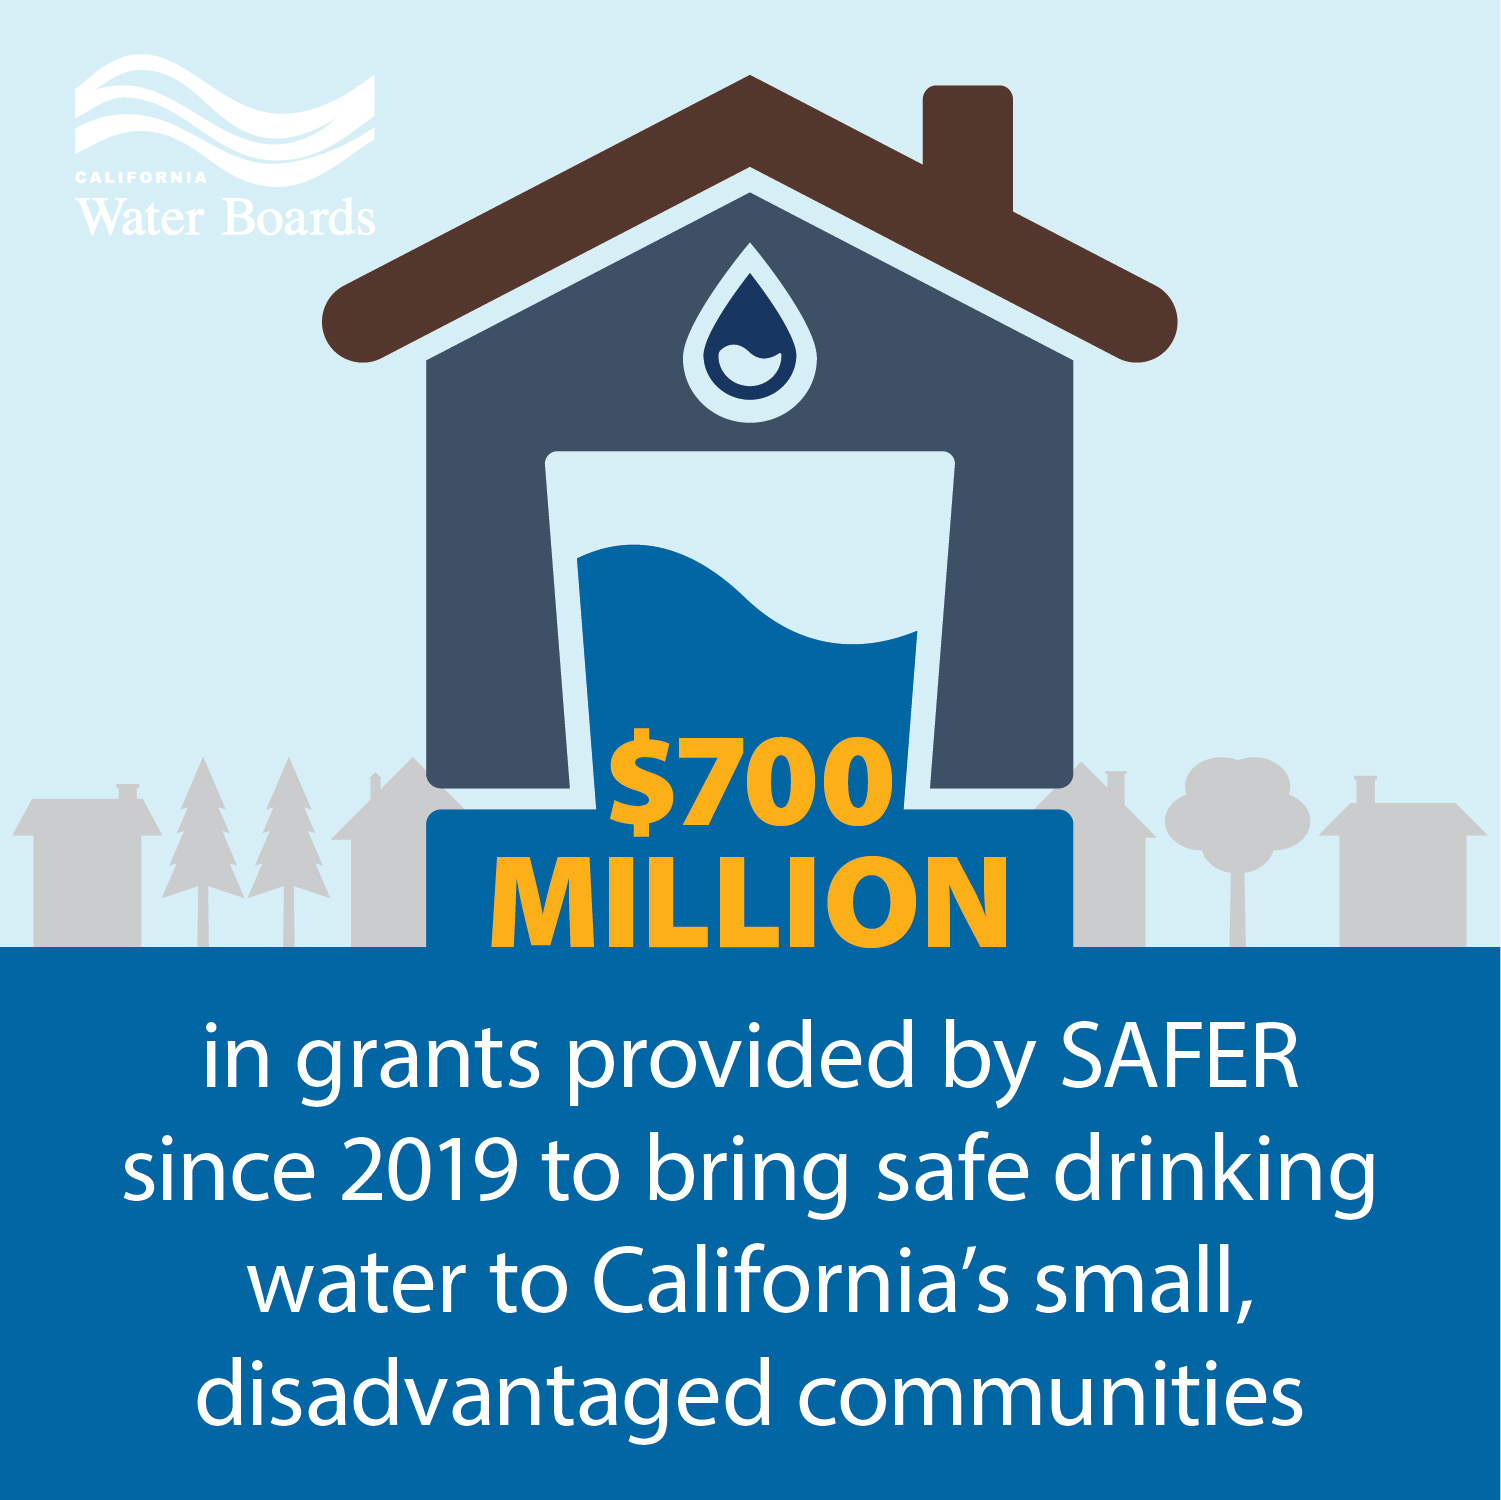 700 Million in grants provided by SAFER since 2019 to bring safe drinking water to California's small, disadvantaged communities